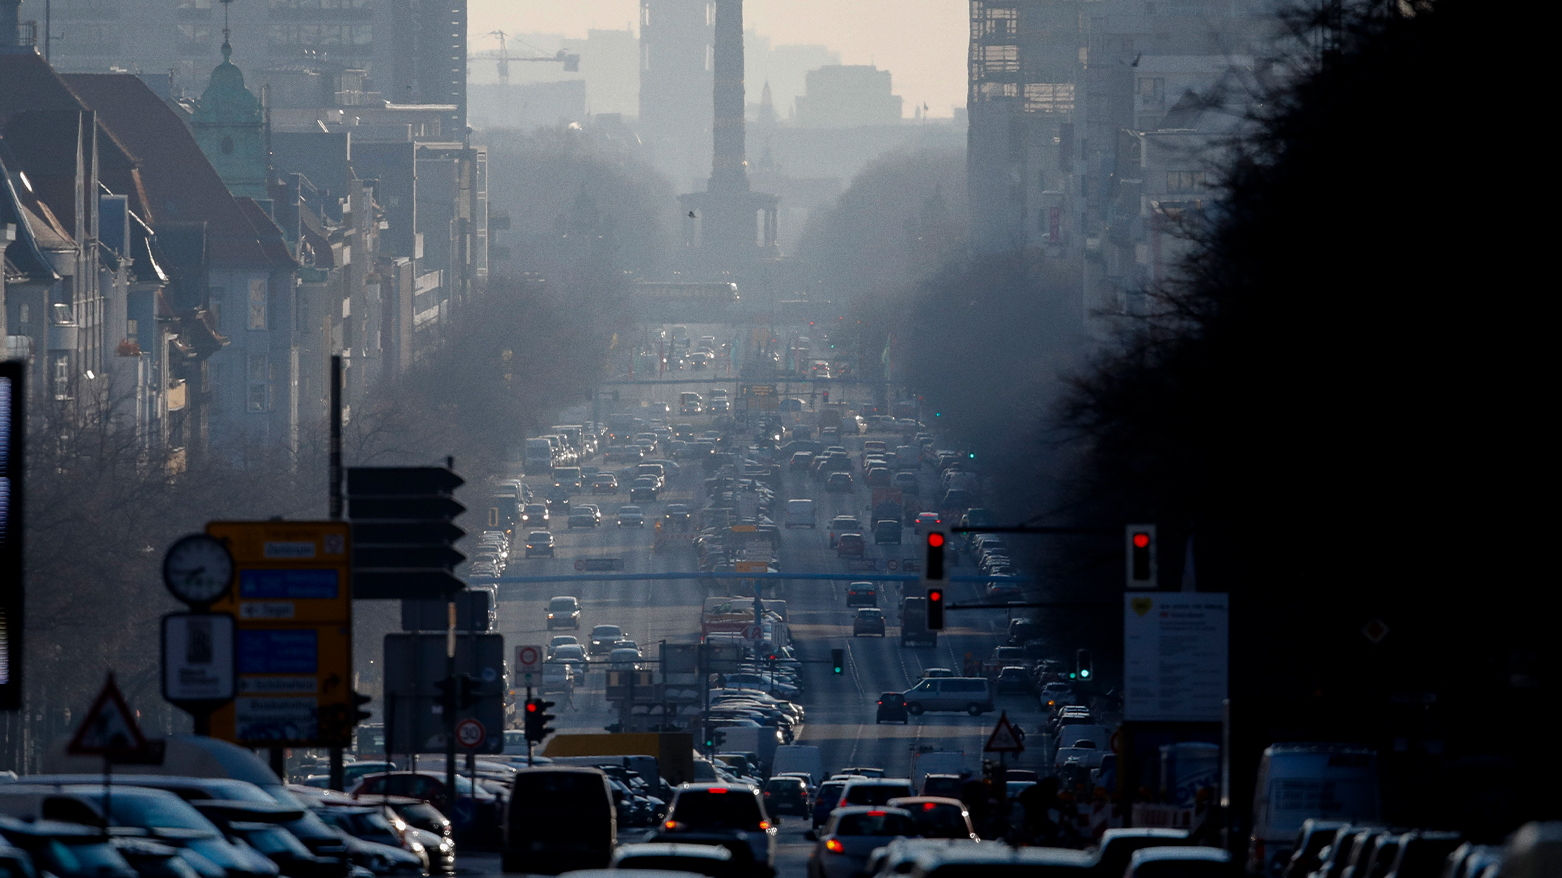 Cars drive on the Bismarckstrasse road, a main entrance road in the German capital during rush hour time in Berlin, Germany, Tuesday, March 24, 2020. (Photo: AP/Markus Schreiber)